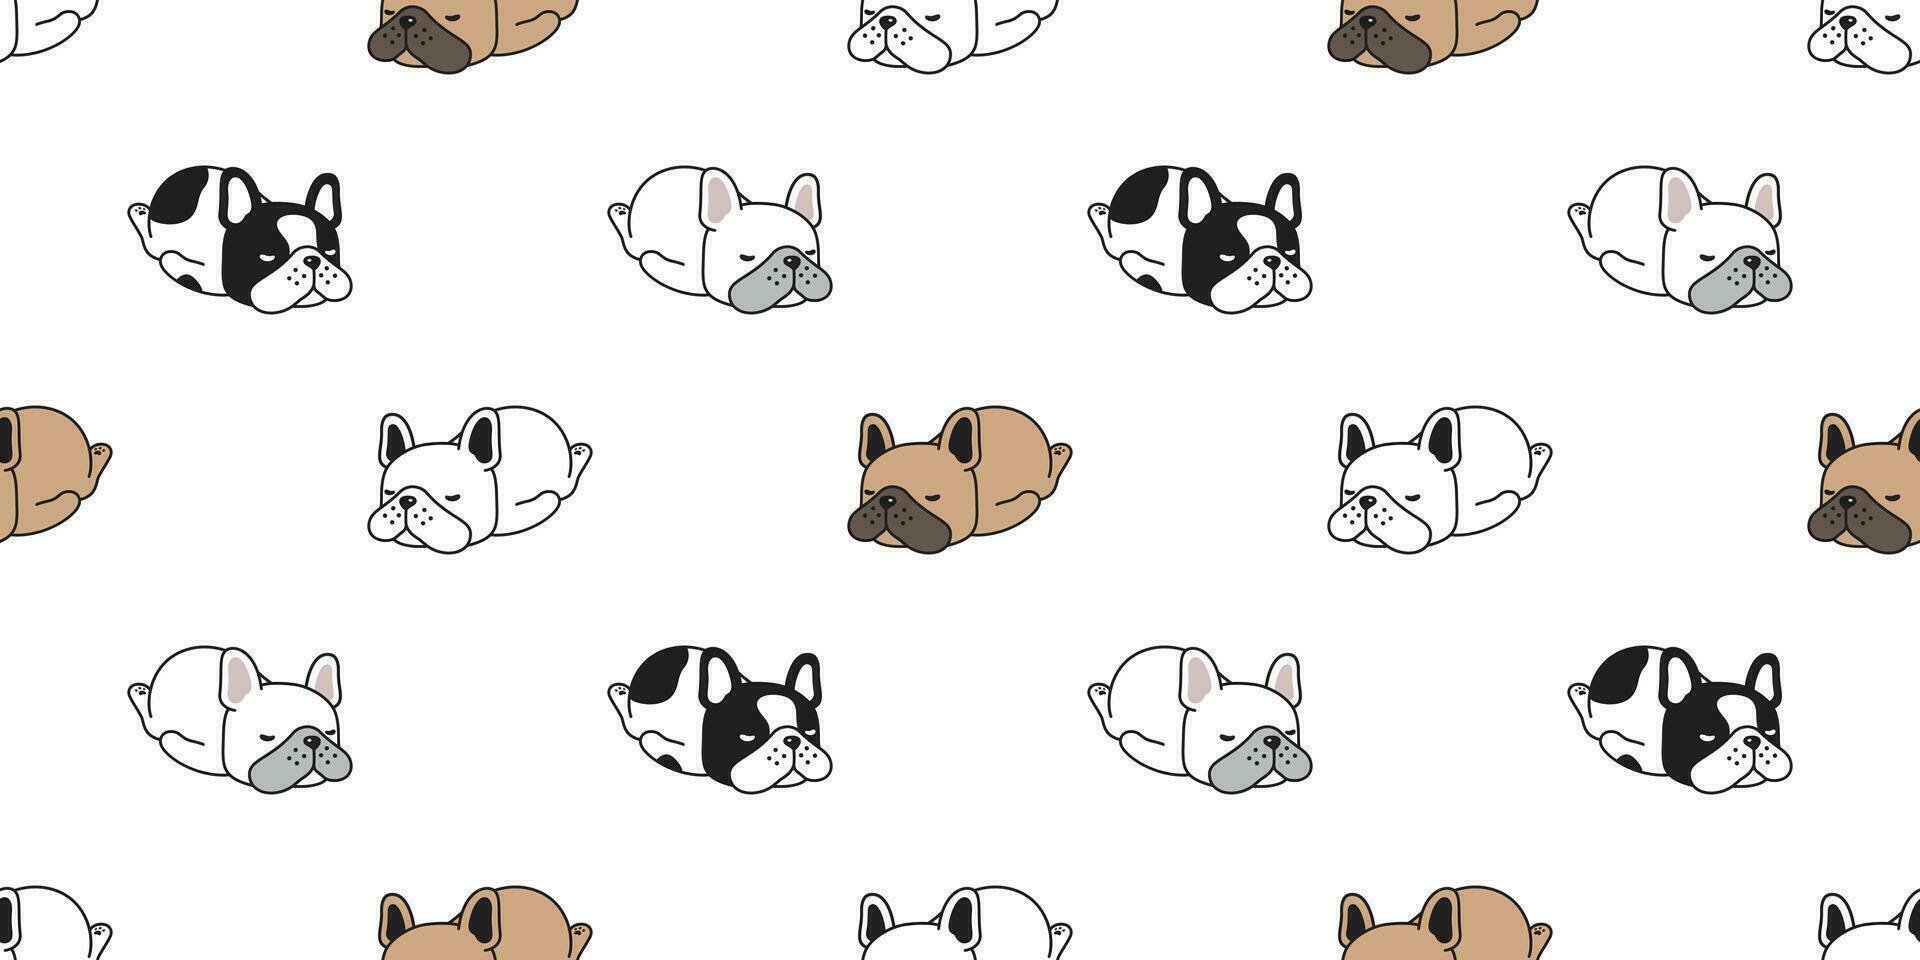 dog seamless pattern vector french bulldog sleeping cartoon scarf isolated repeat background tile wallpaper illustration design